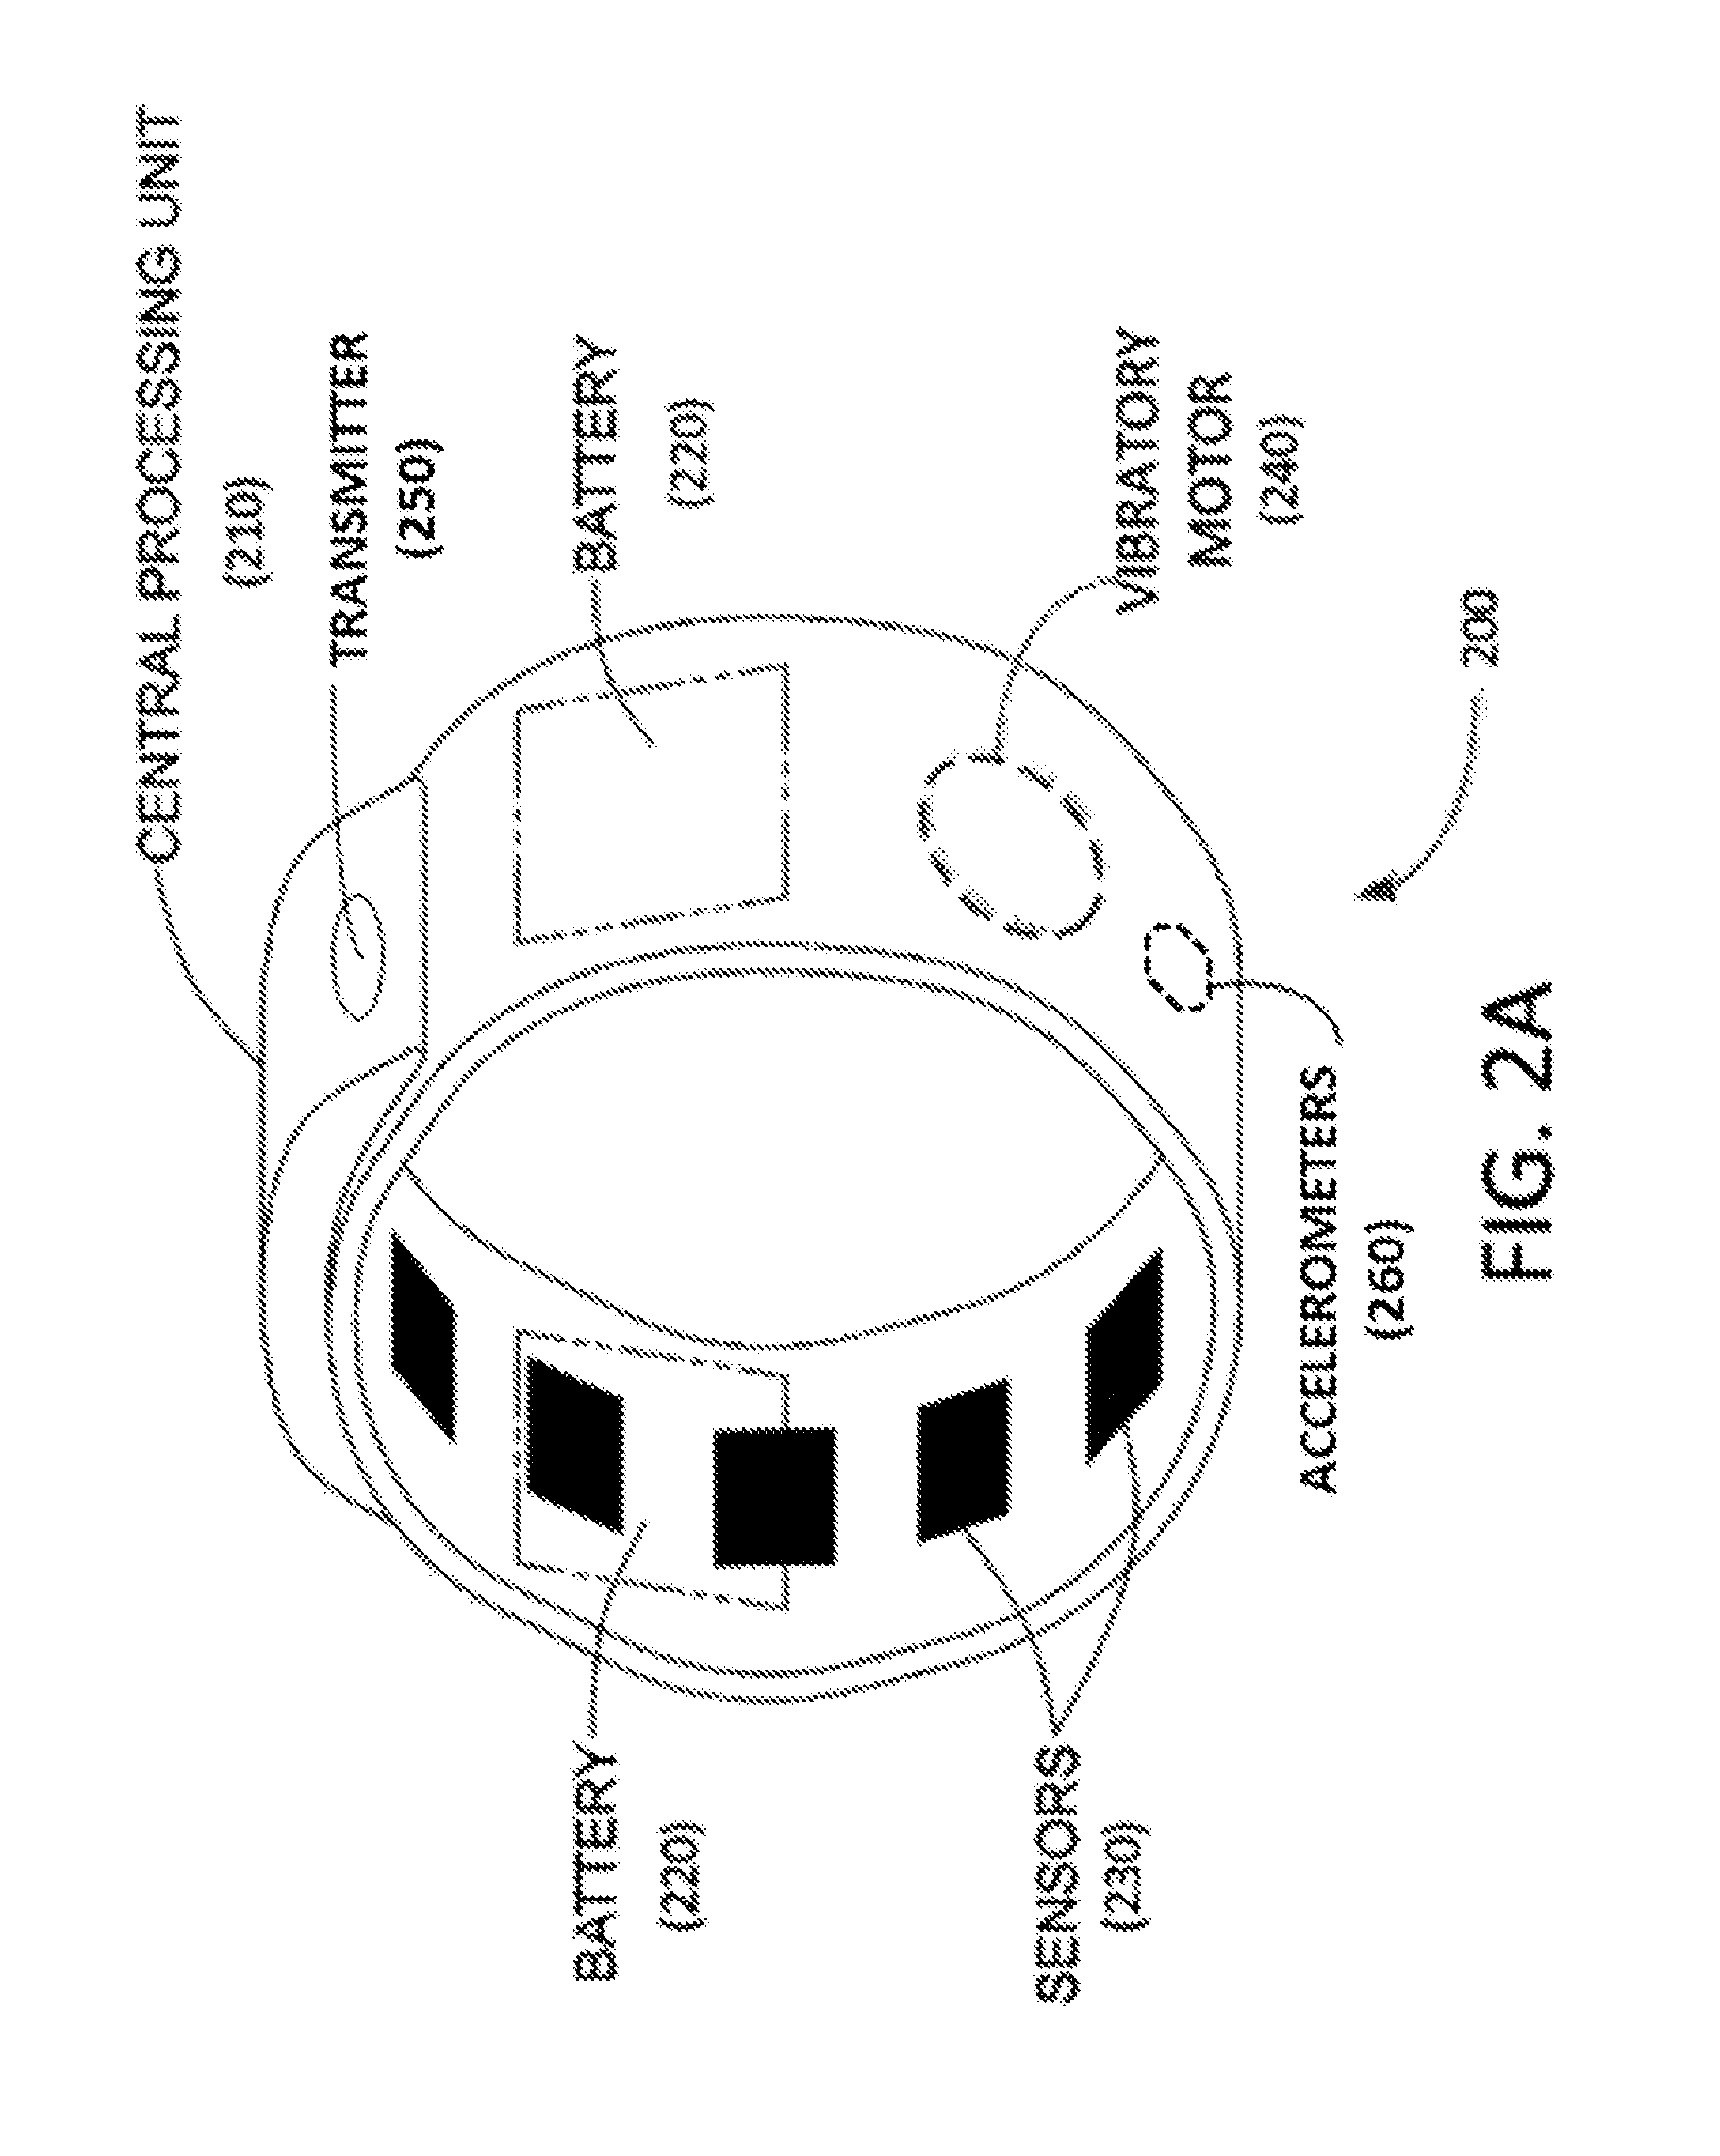 Wearable muscle interface systems, devices and methods that interact with content displayed on an electronic display